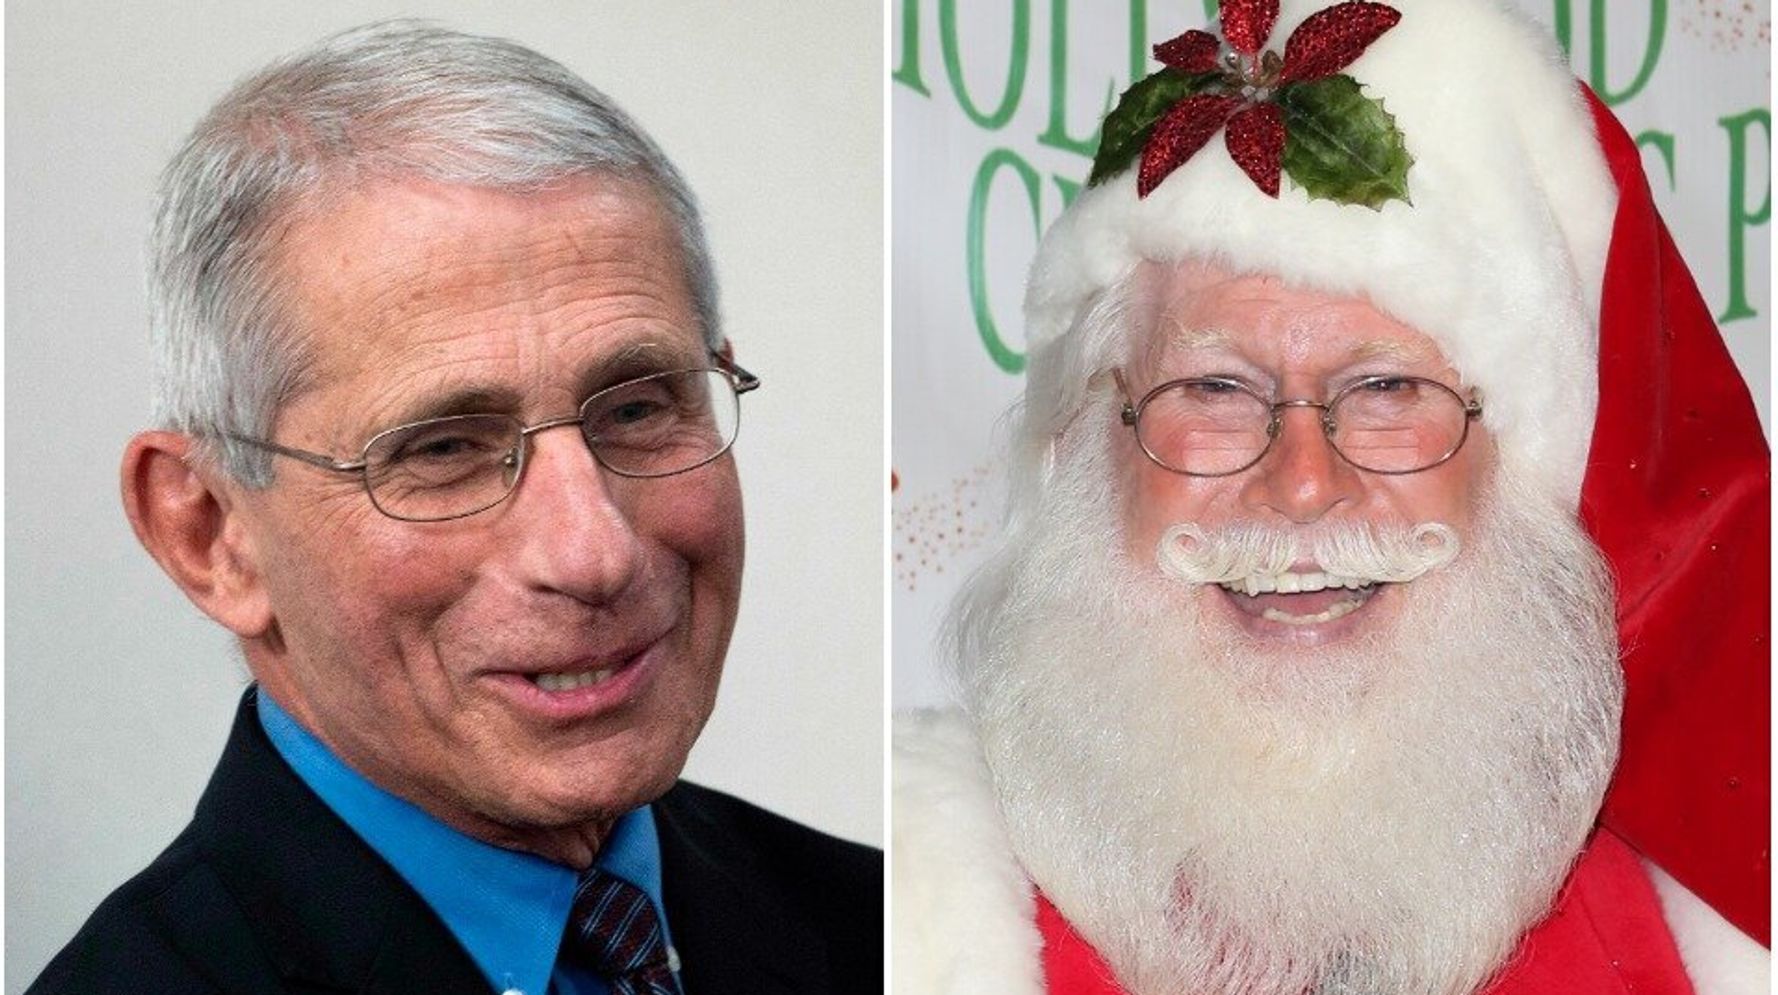 Fauci Says Santa Claus Has 'Innate Immunity' And Can't Spread COVID-19